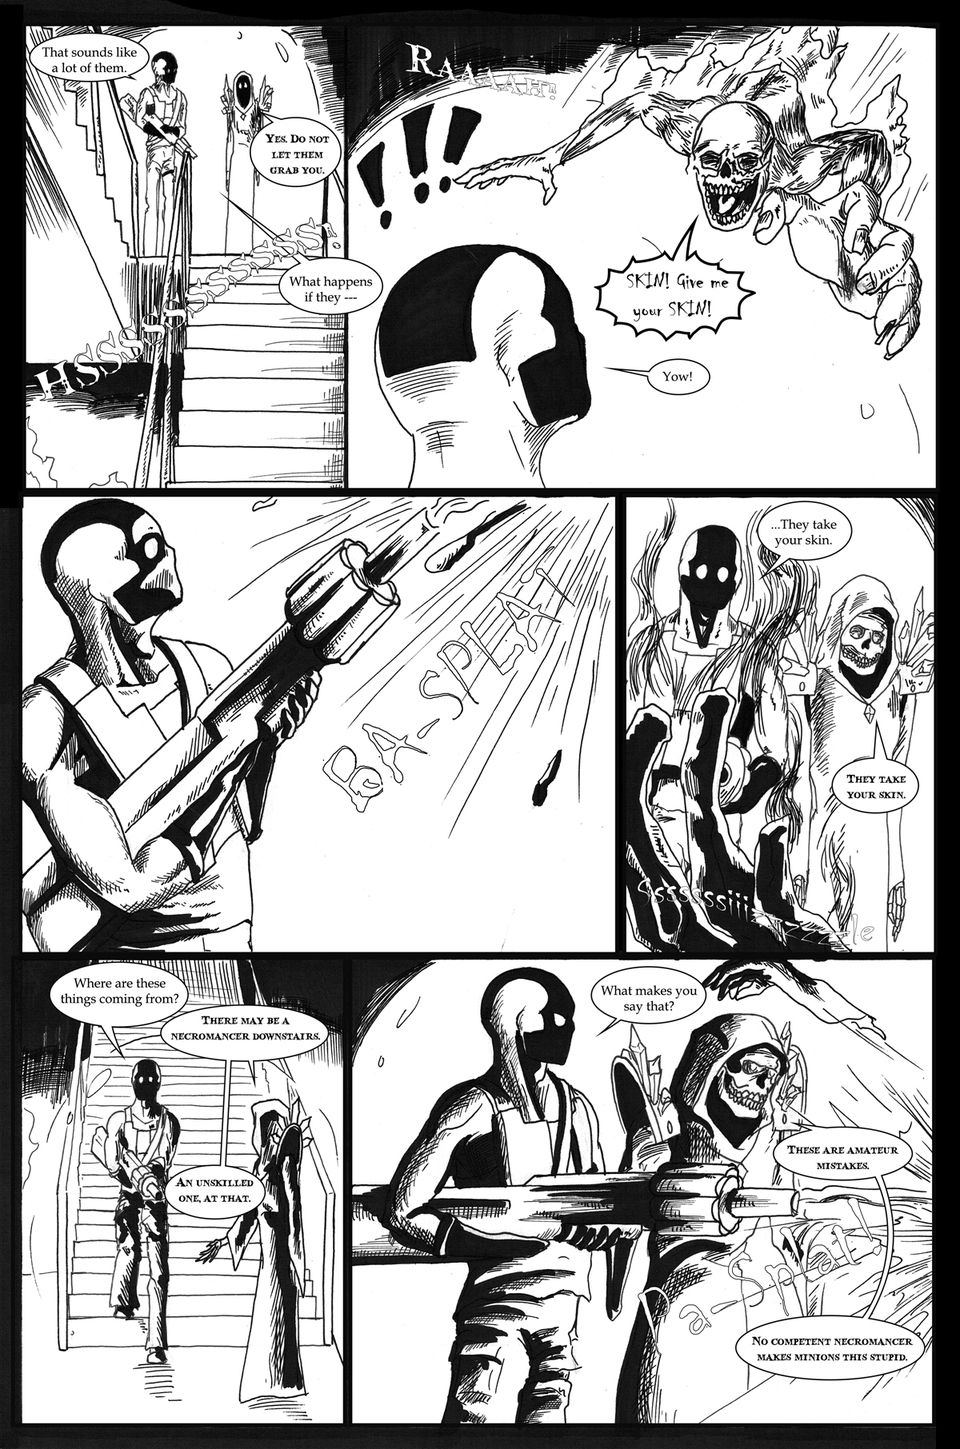 Issue 2, Page 10